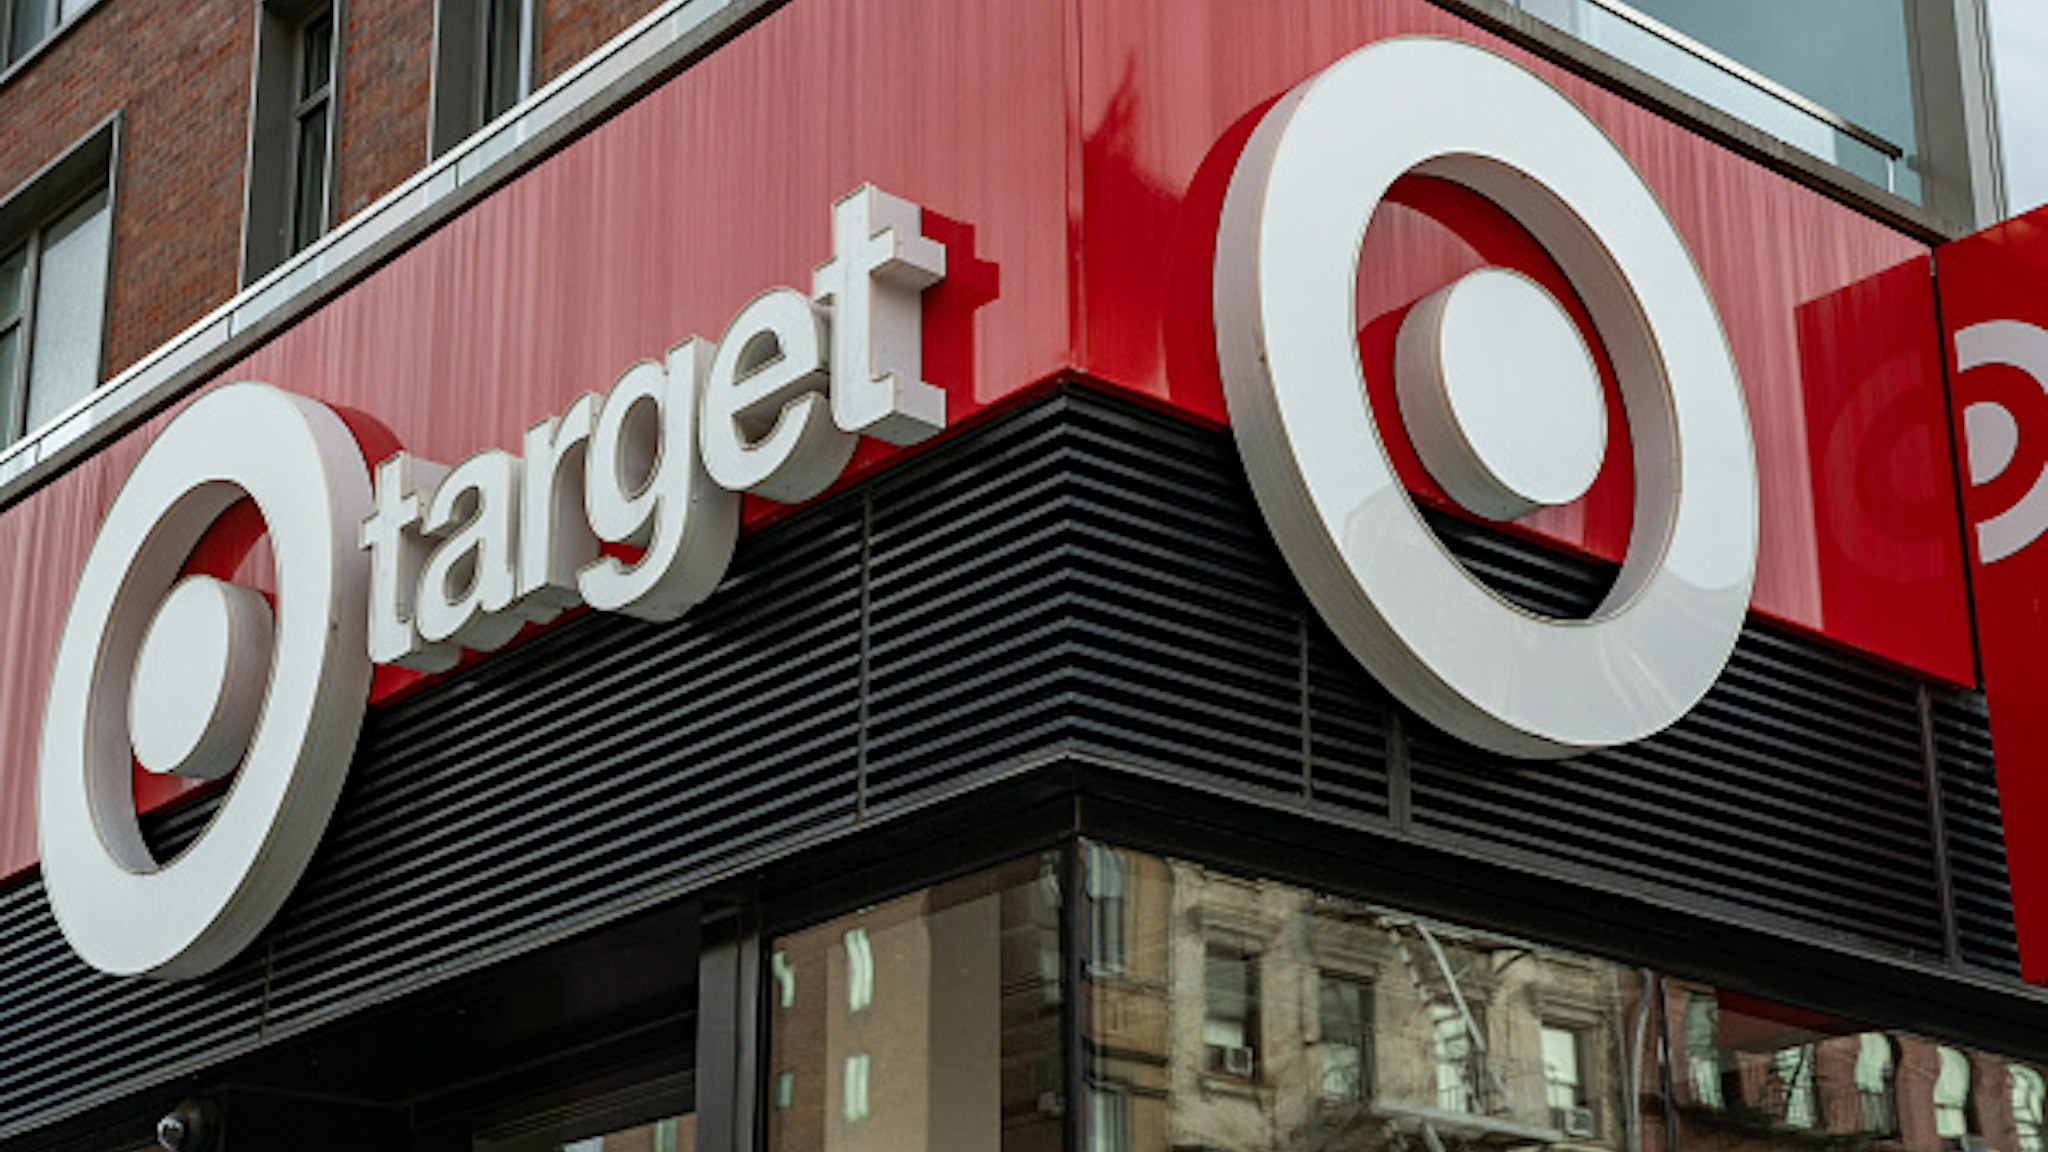 A Target retail store is seen on 14th street in Manhattan on November 20, 2019 in New York City. Target has announced its 3rd quarter results, a 4.5% increase in sales and a 15% growth in revenues.  Targets strong earnings has raised their stock value 67% in 2019.